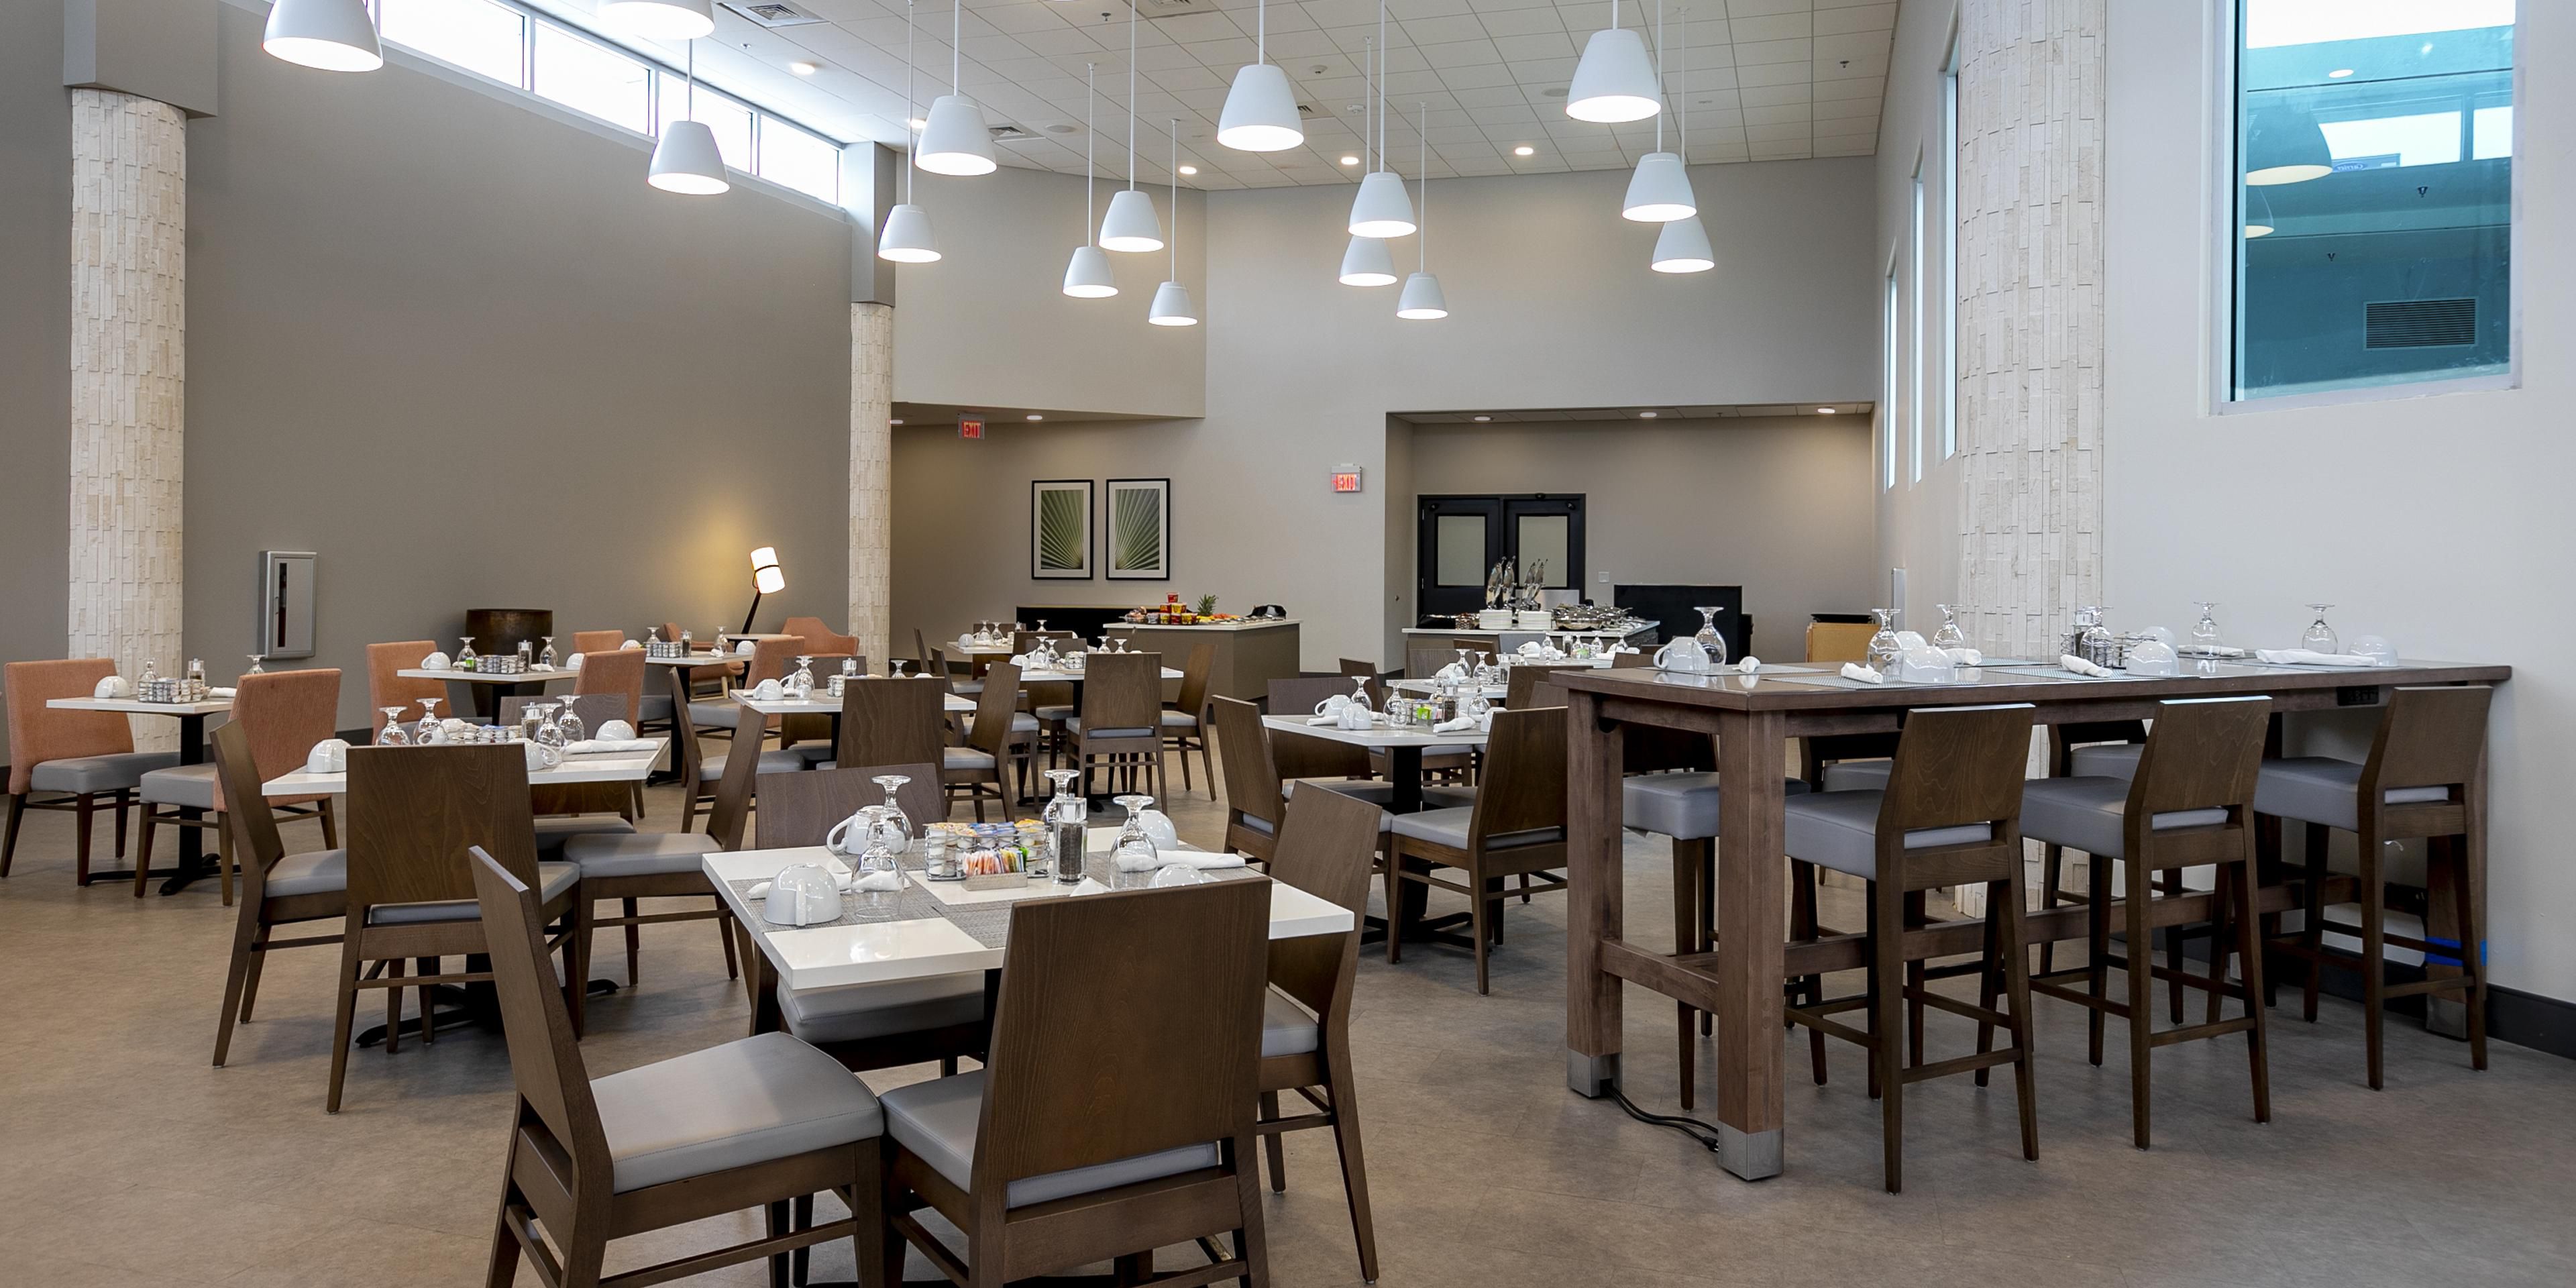 Dine with us at the Bellini Cafe for breakfast or dinner